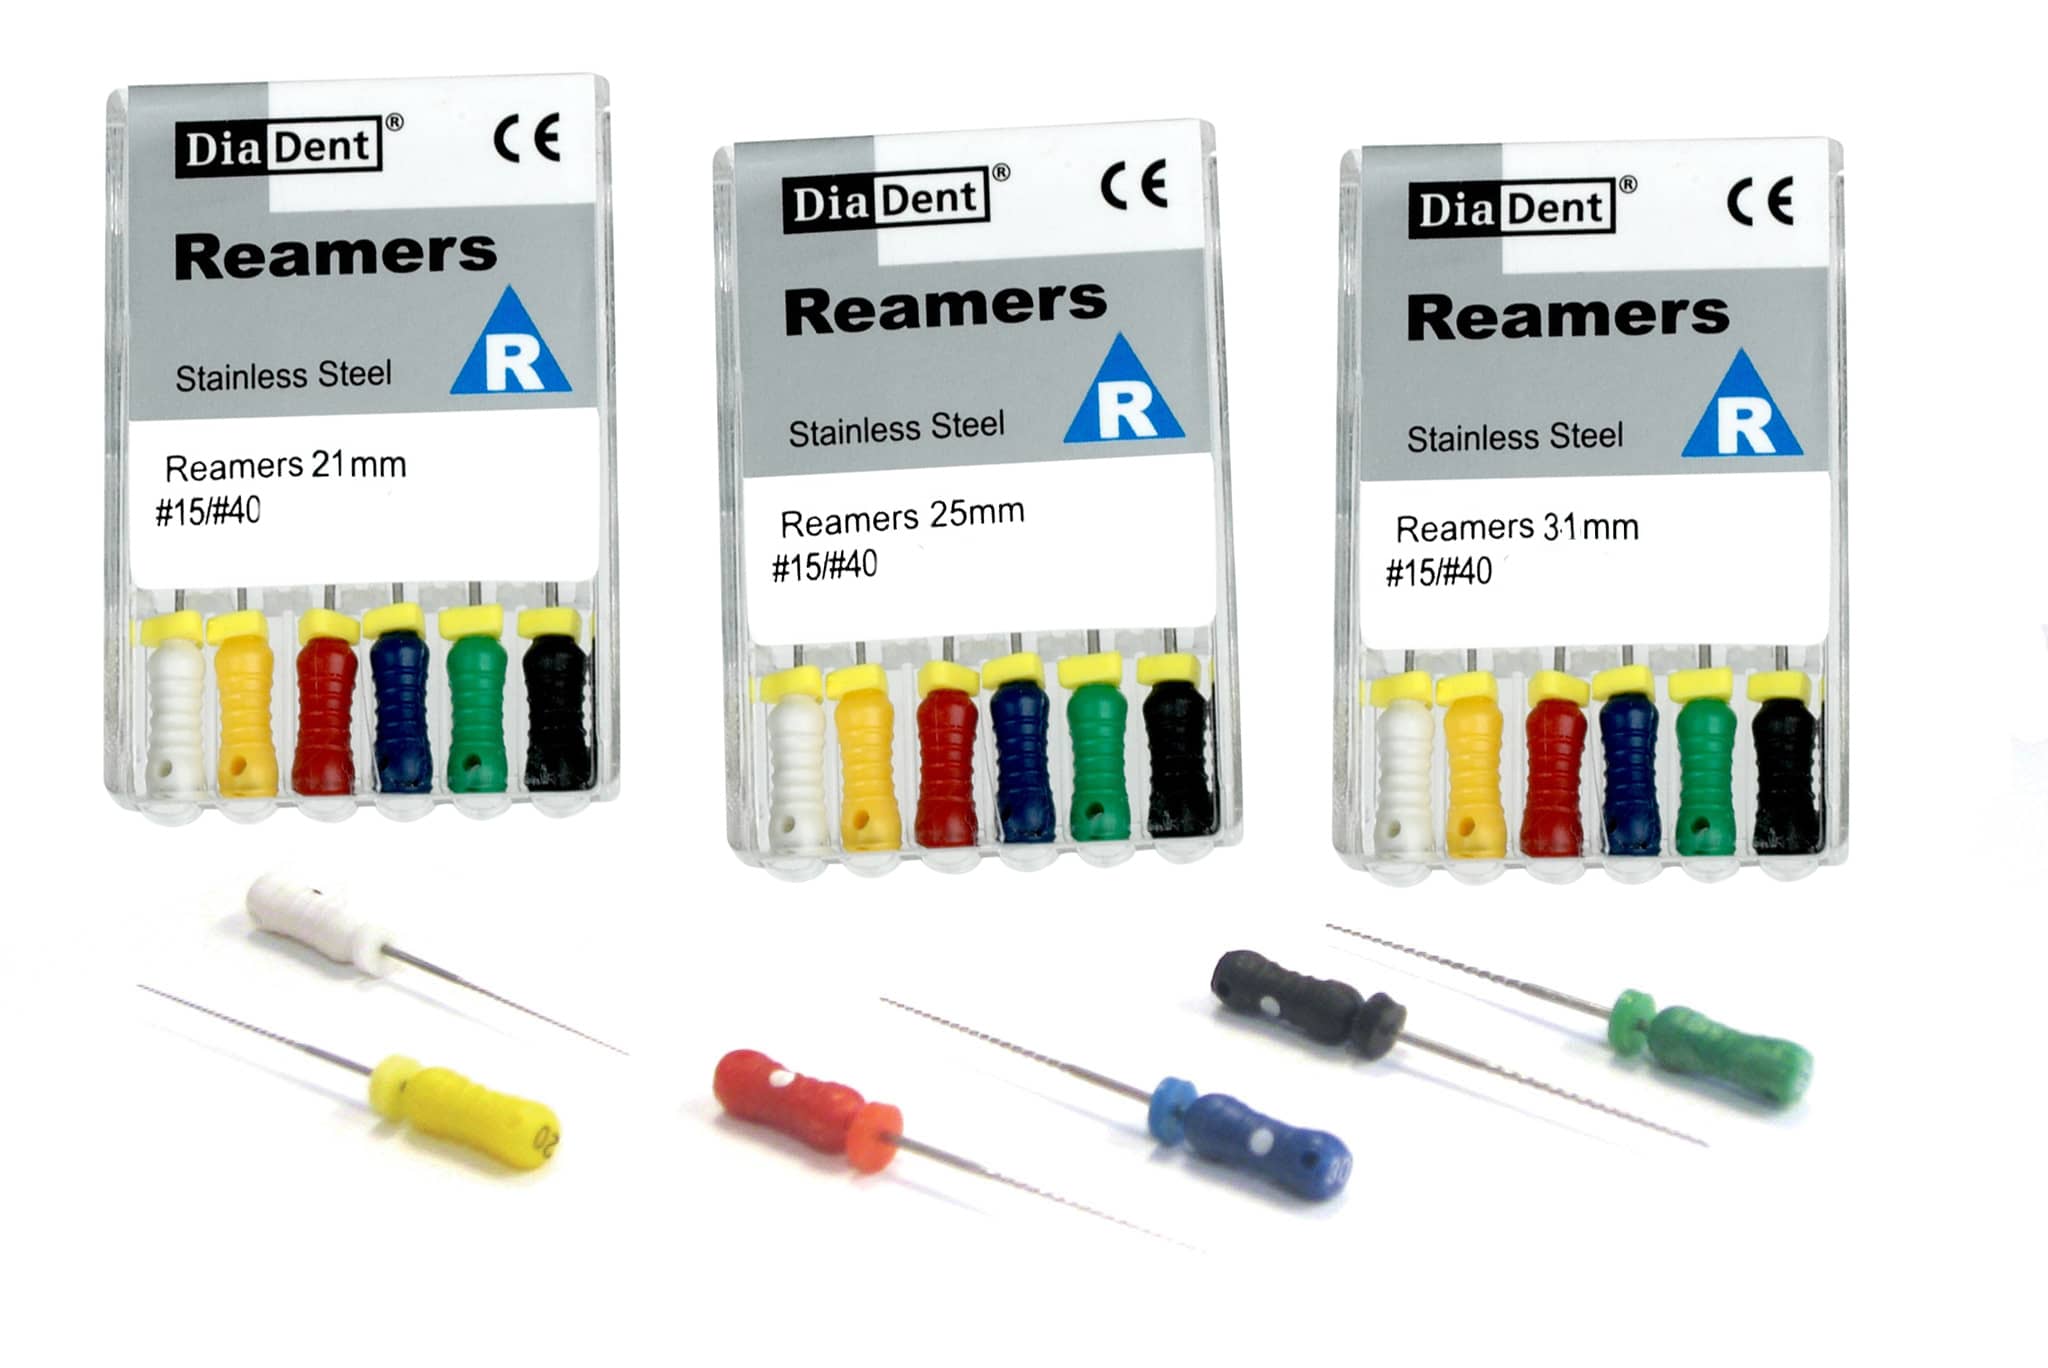 REAMERS Diadent 31mm - 15